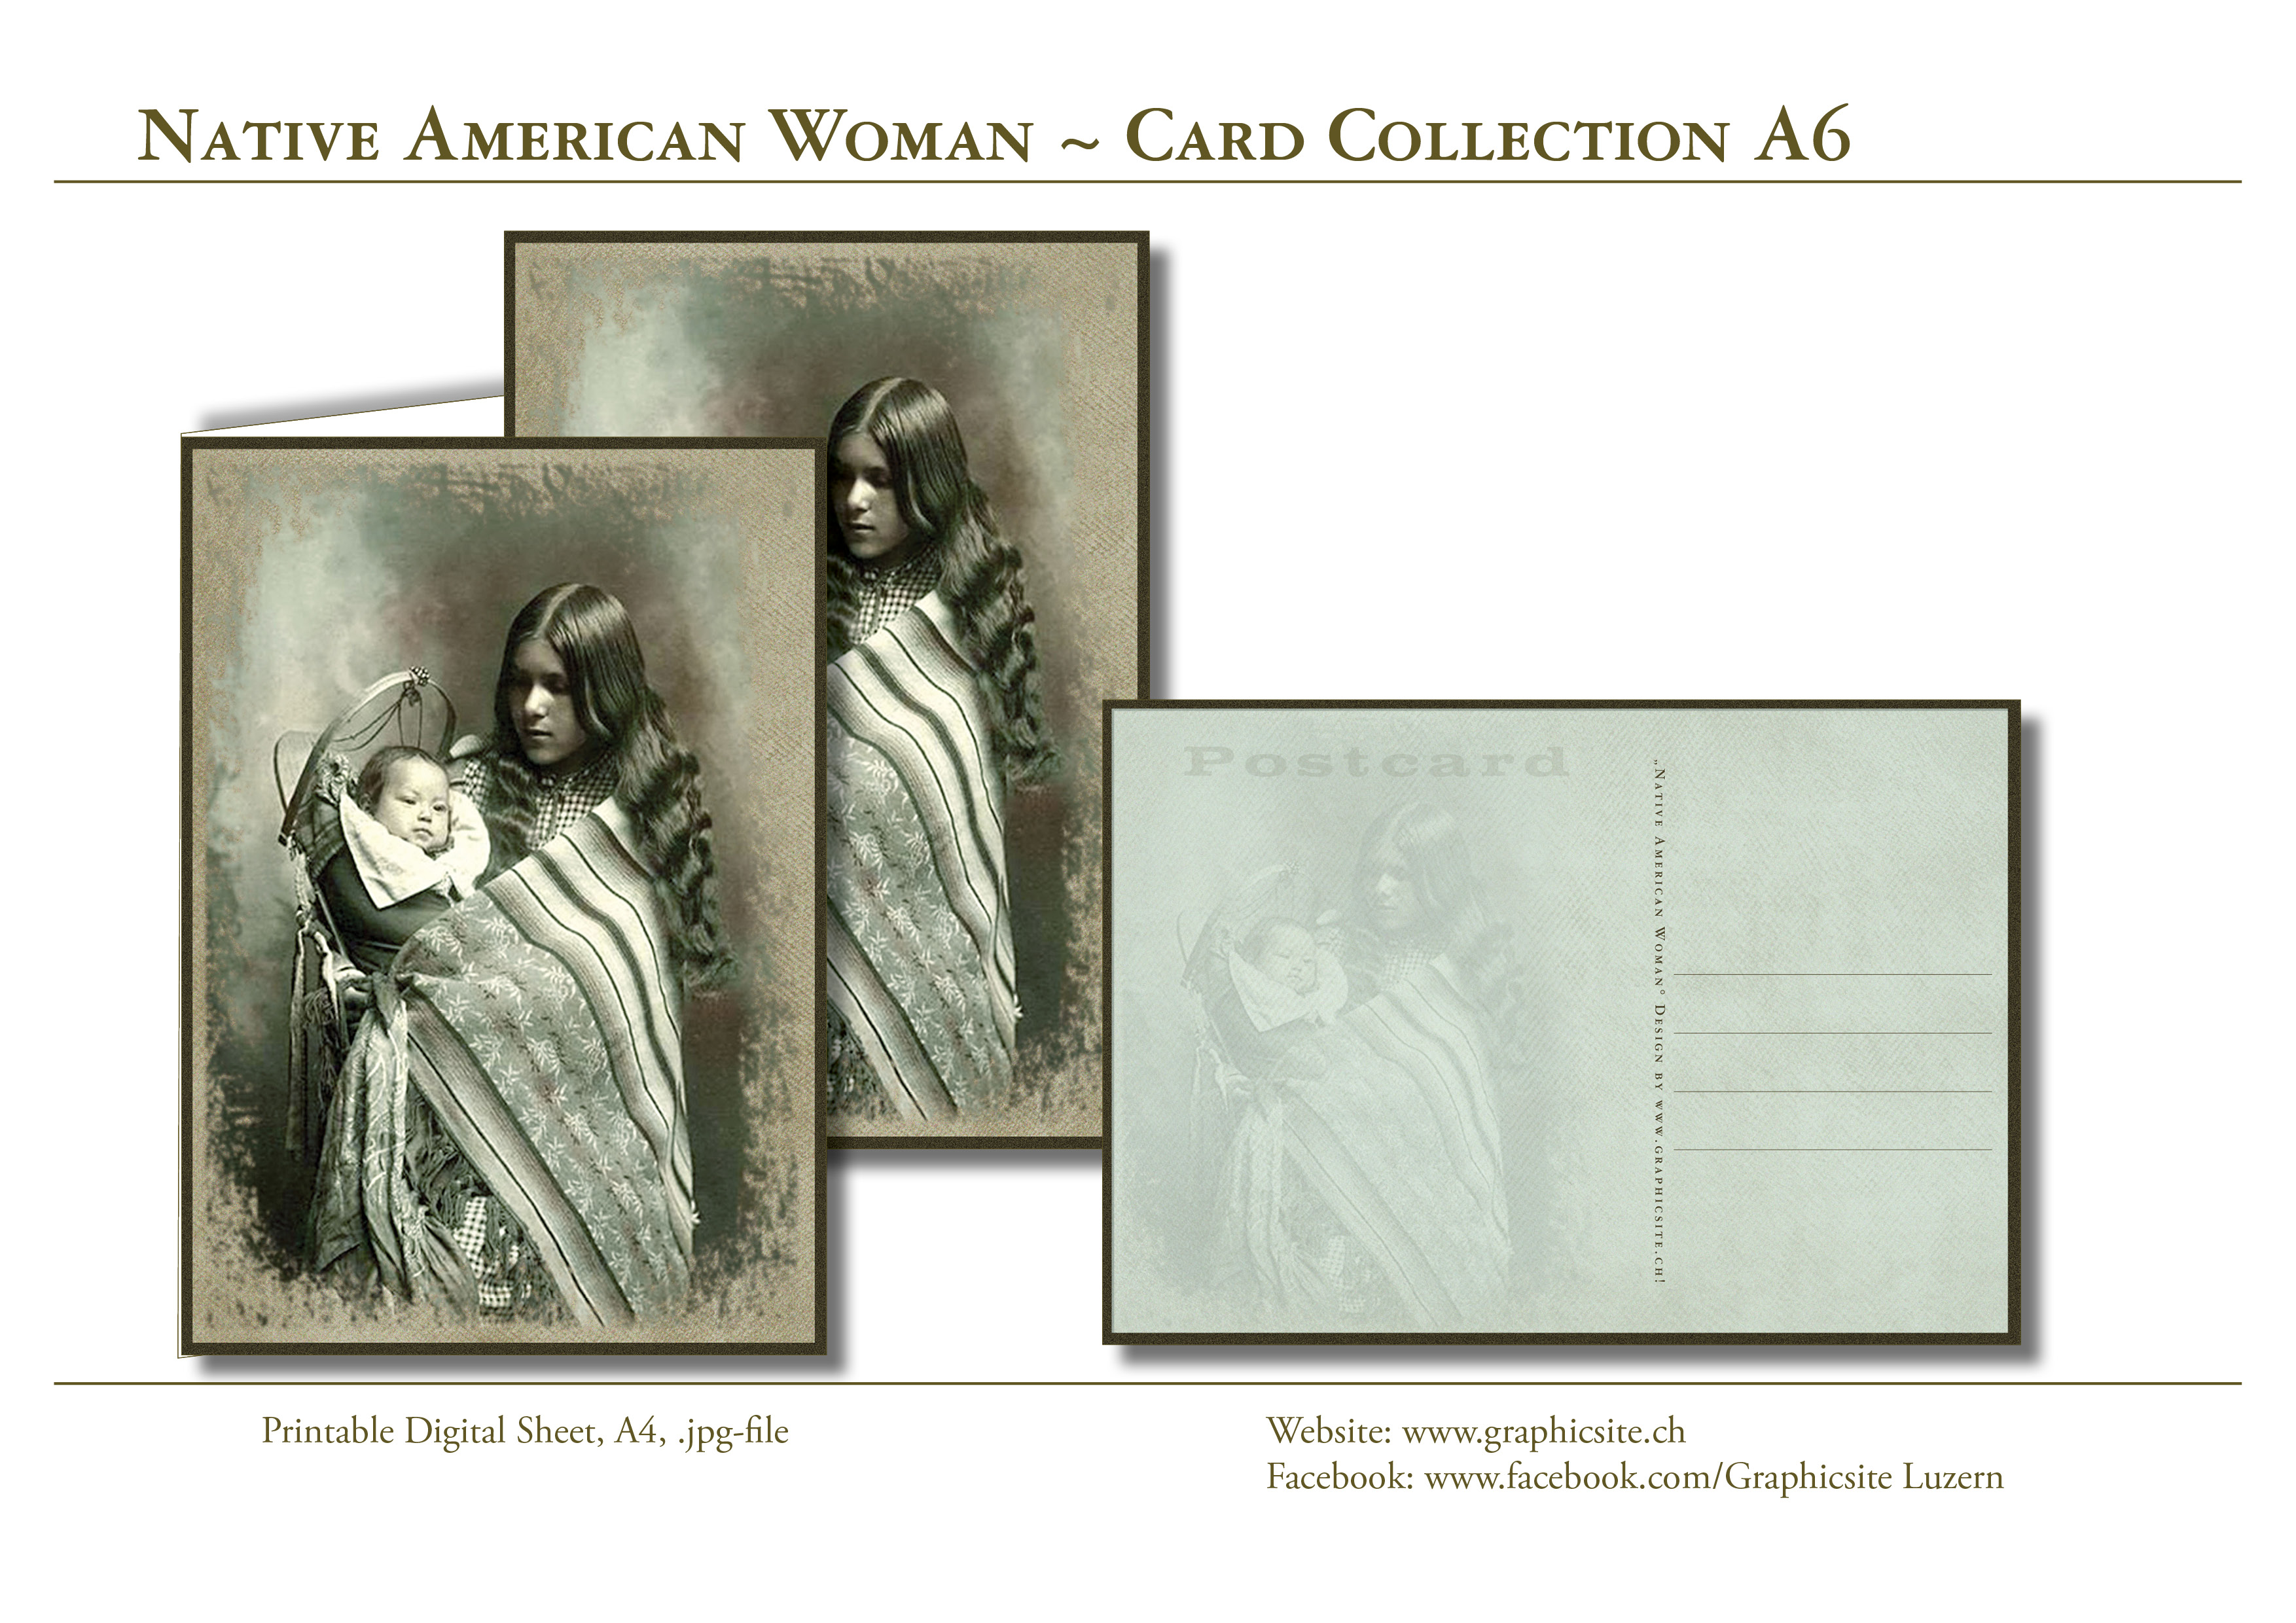 Printable Digital Sheets - CardCollections A6, Postcard, GreetingCard, Native American Woman, Indian, Vintage, Graphic Design, Luzern,